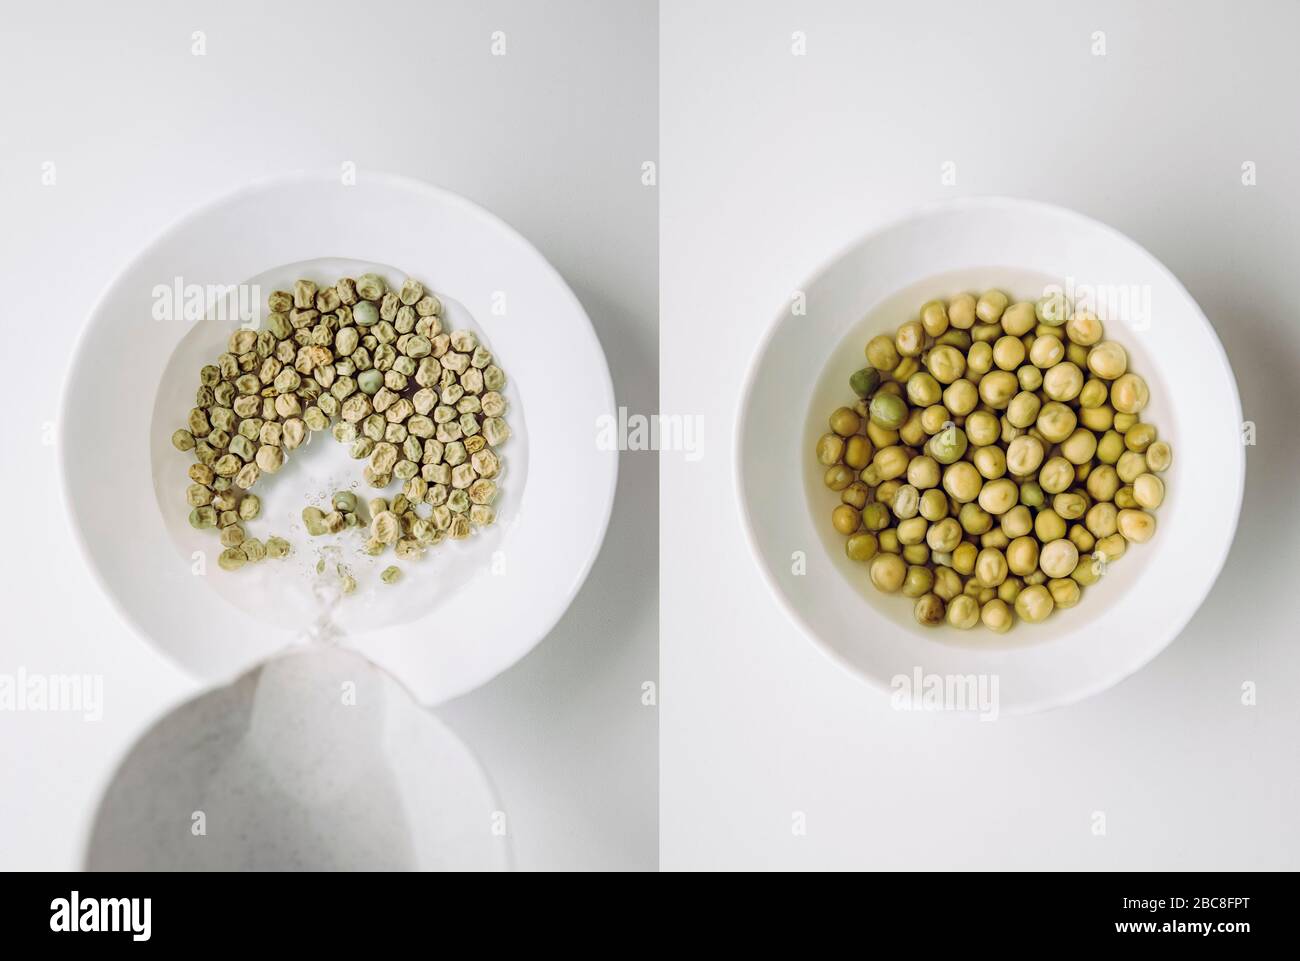 Soaking green pea seeds in warm water in bowl to fasten germination process when planting in garden. Before soaking on left after overnight soak on ri Stock Photo